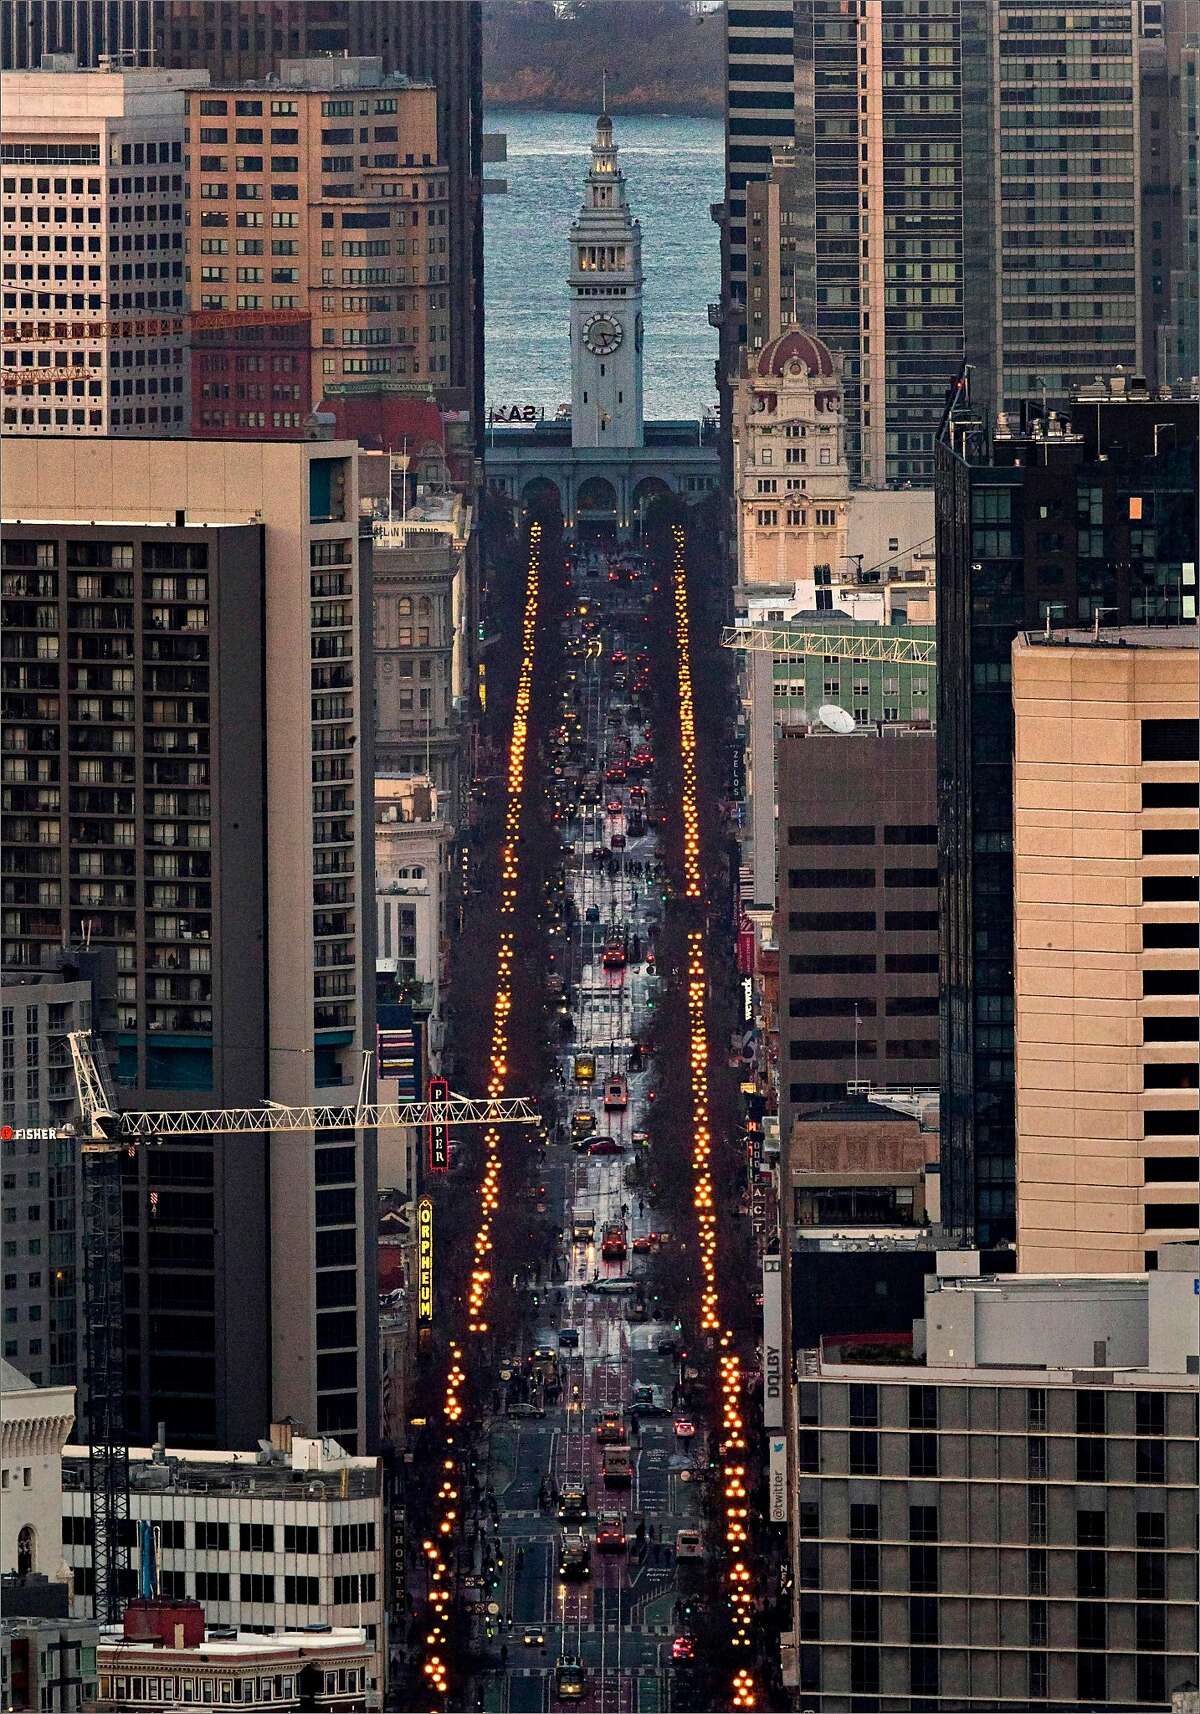 Market Street as seen from Twin Peaks in San Francisco, Calif., on Monday, January 27, 2020. Beginning Wednesday, private vehicles will no longer be permitted to drive on Market Street from Van Ness Avenue to Steuart Street.